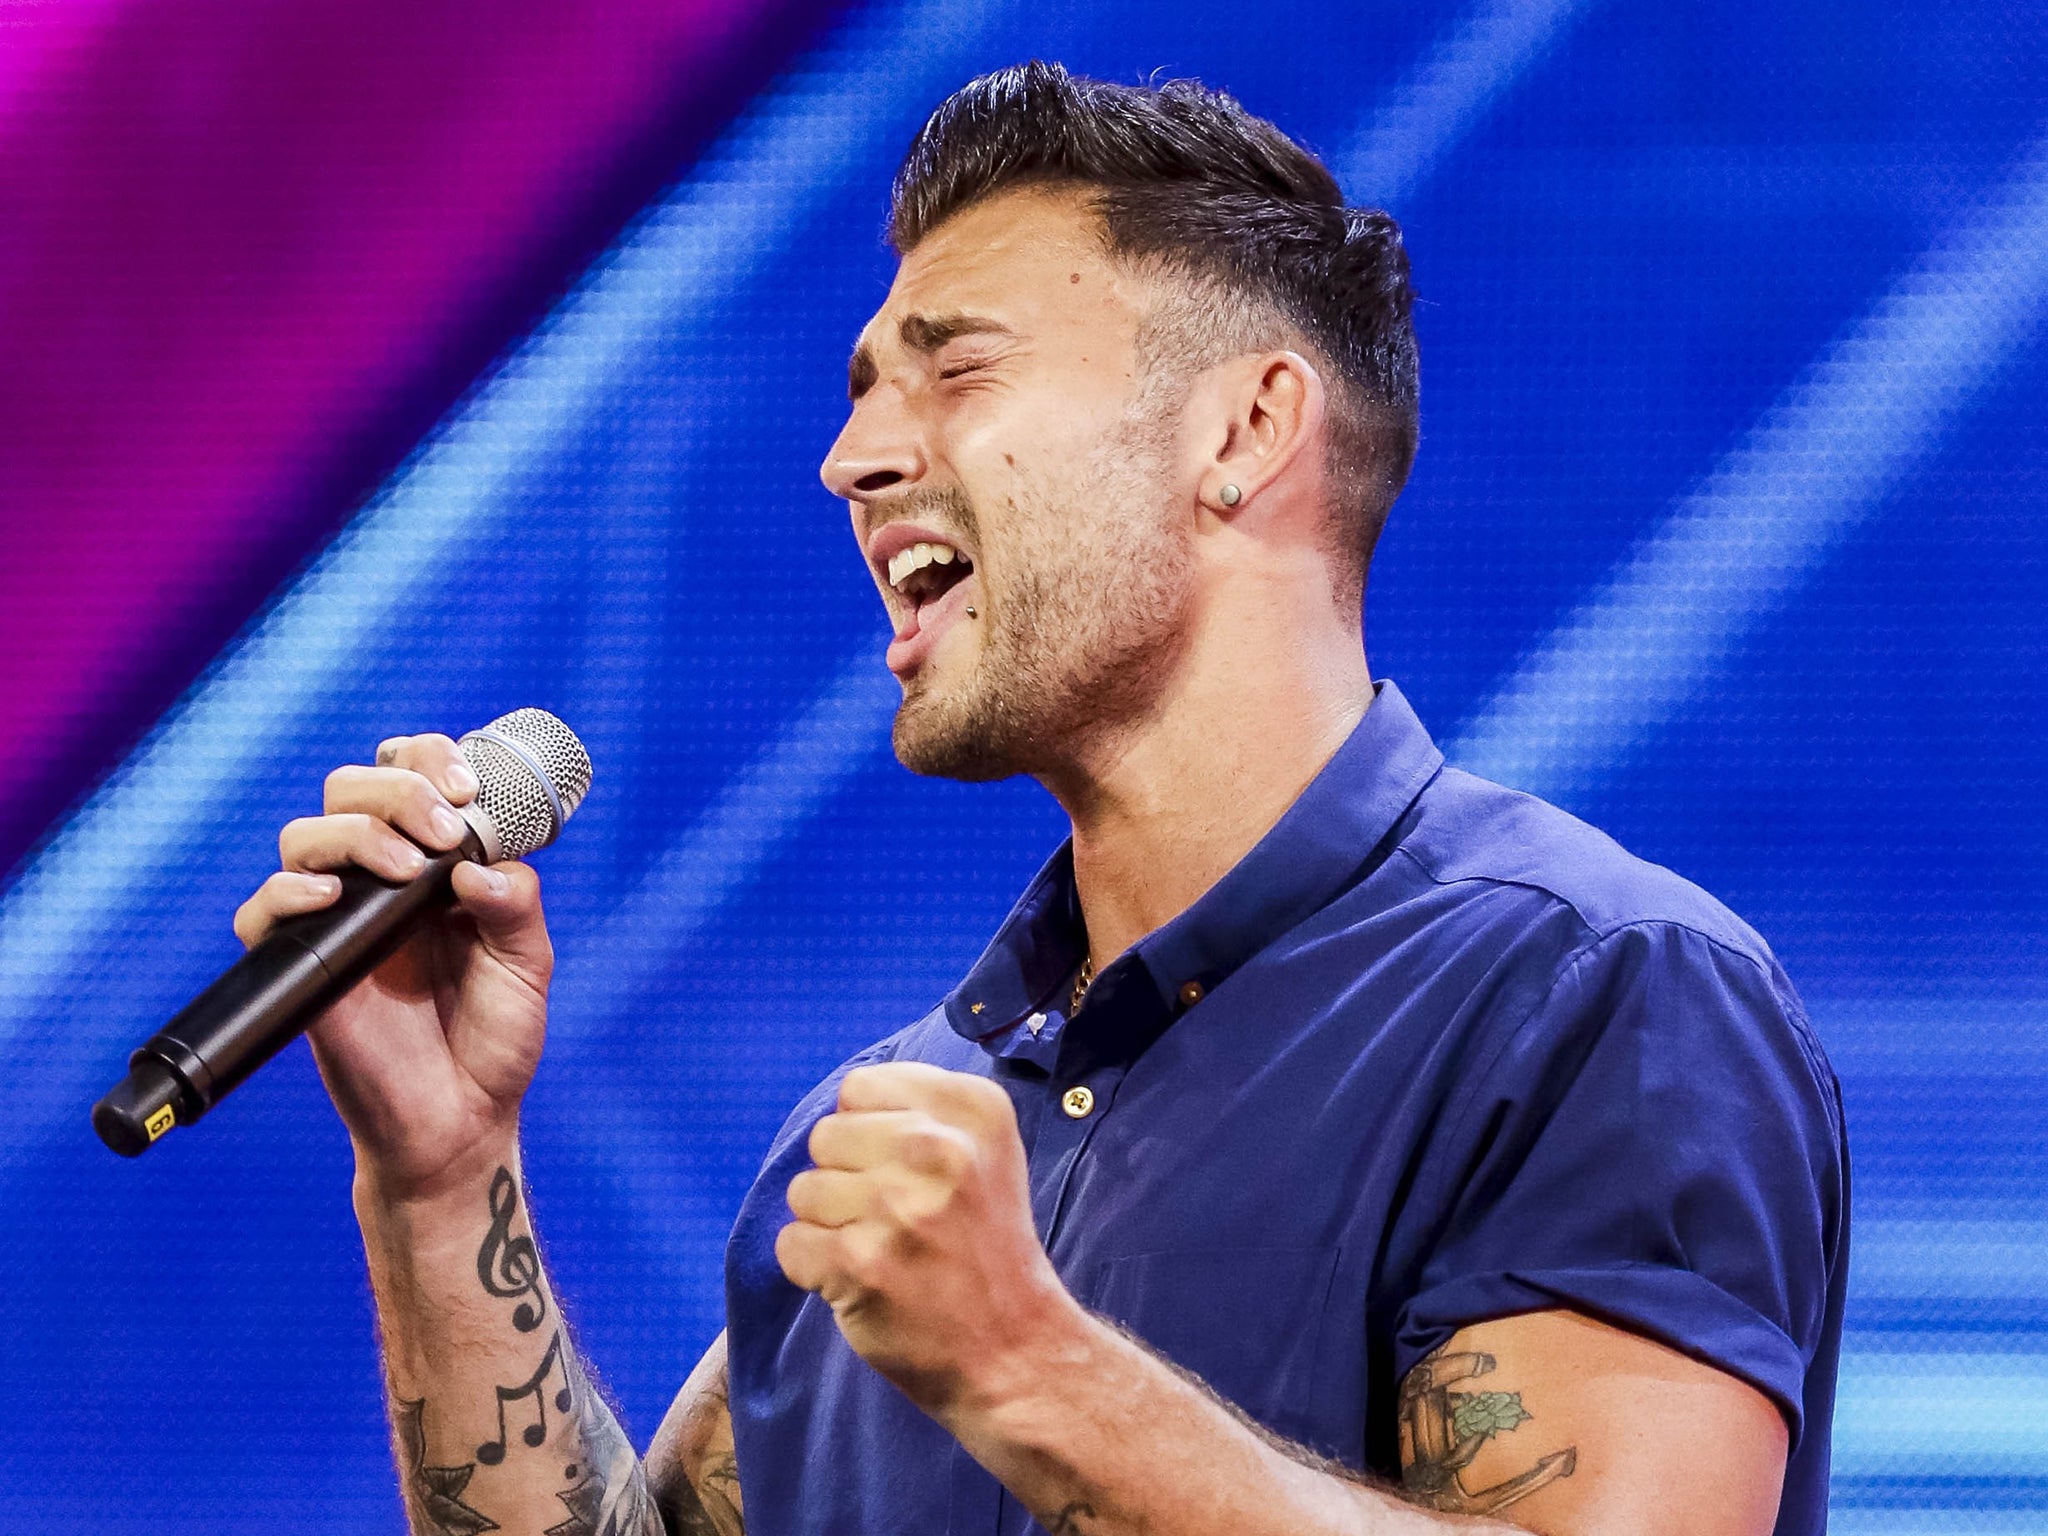 Jake Quickenden sings his heart out in his second audition